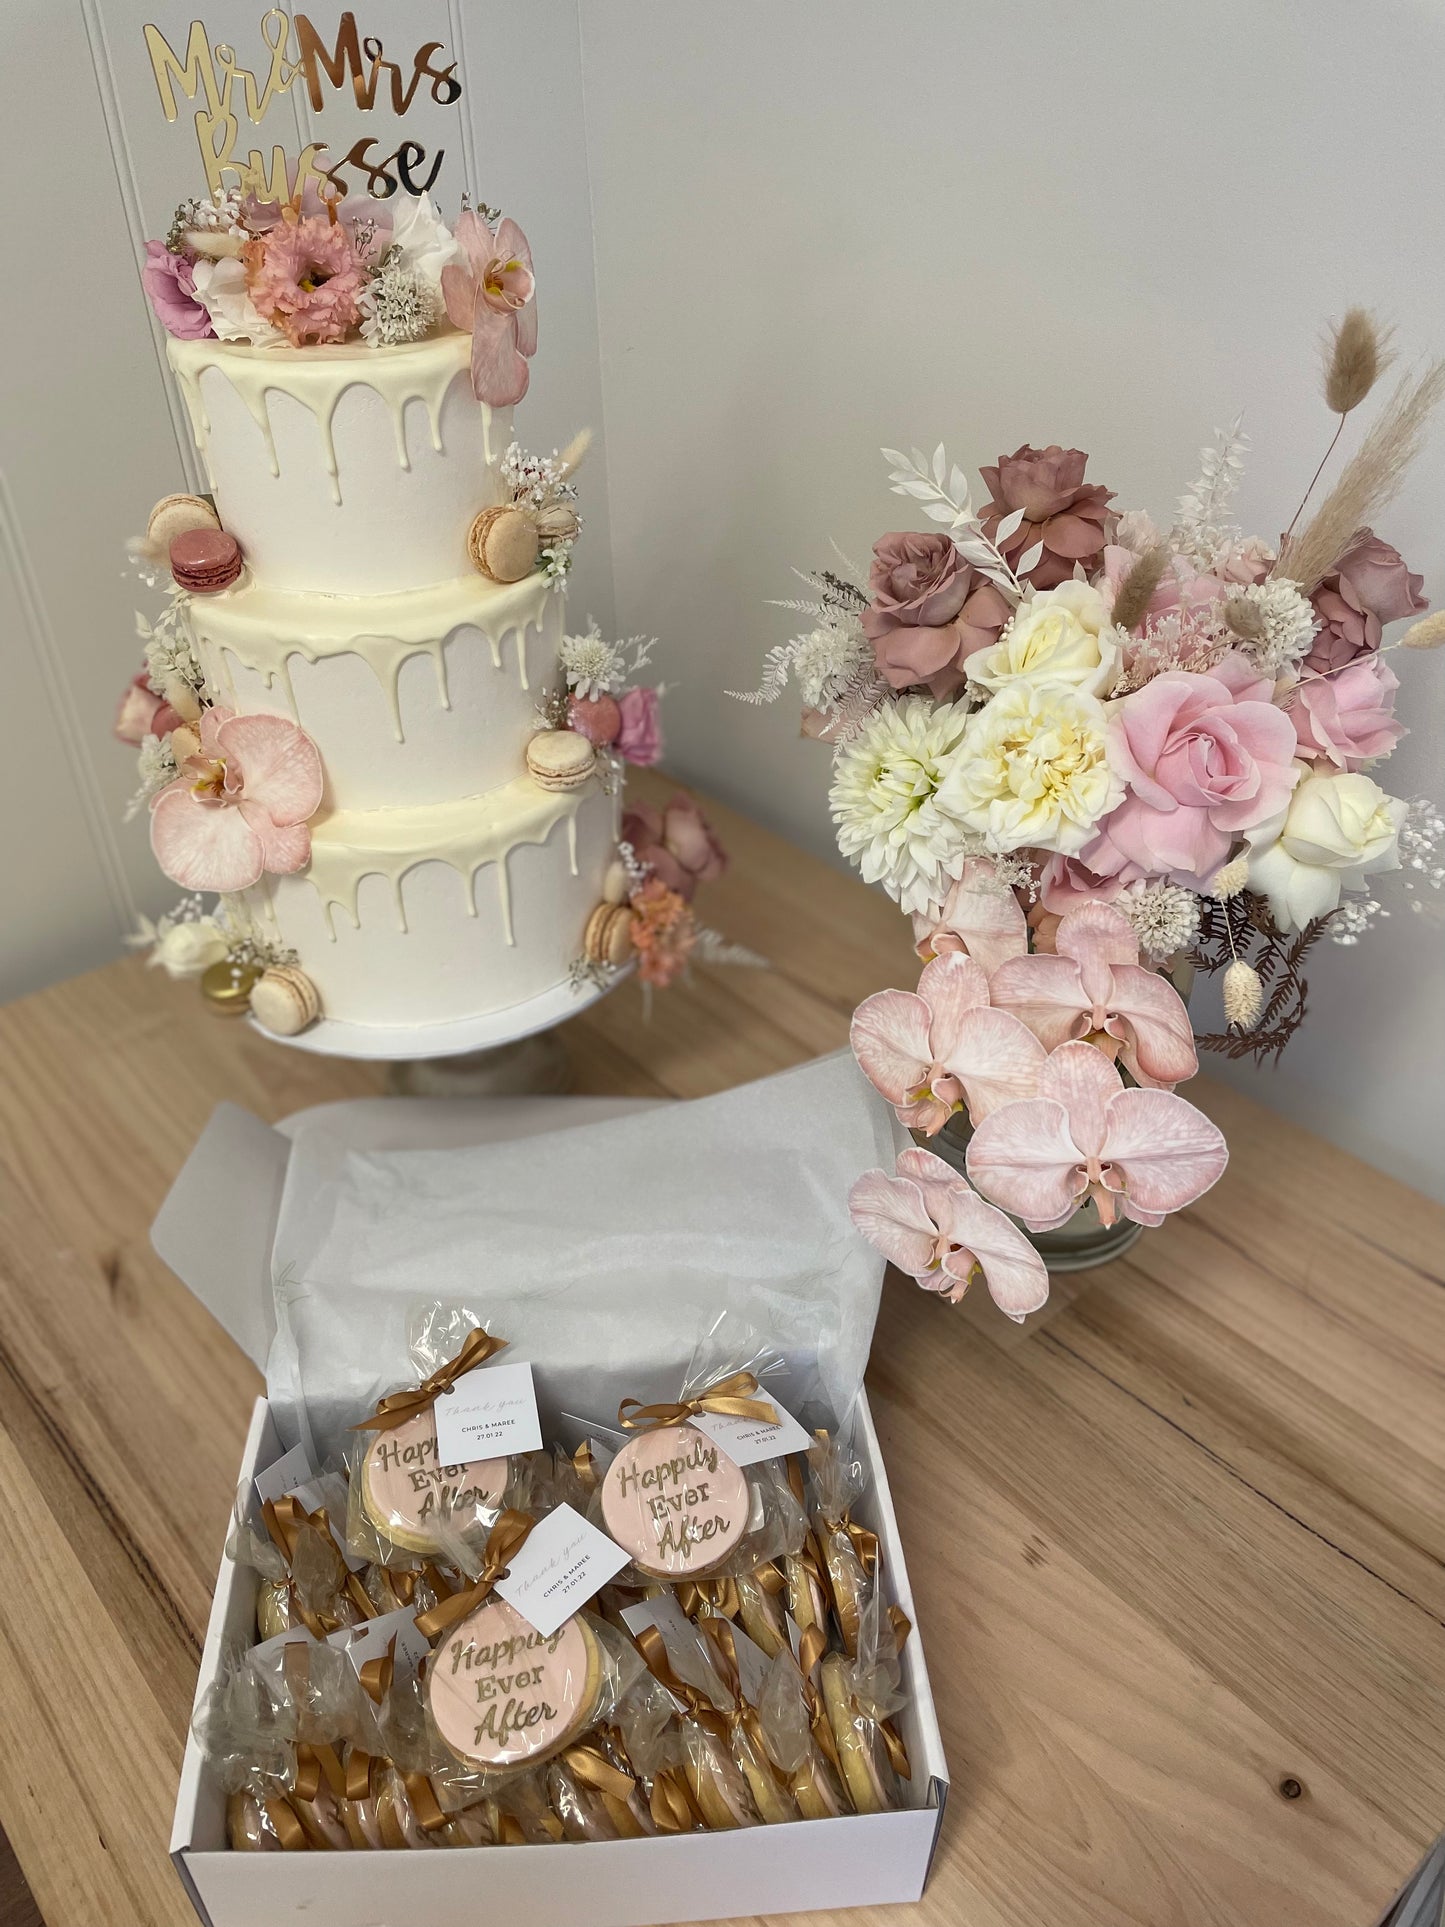 3 Tier Buttercream with Drizzle & Fresh Flowers